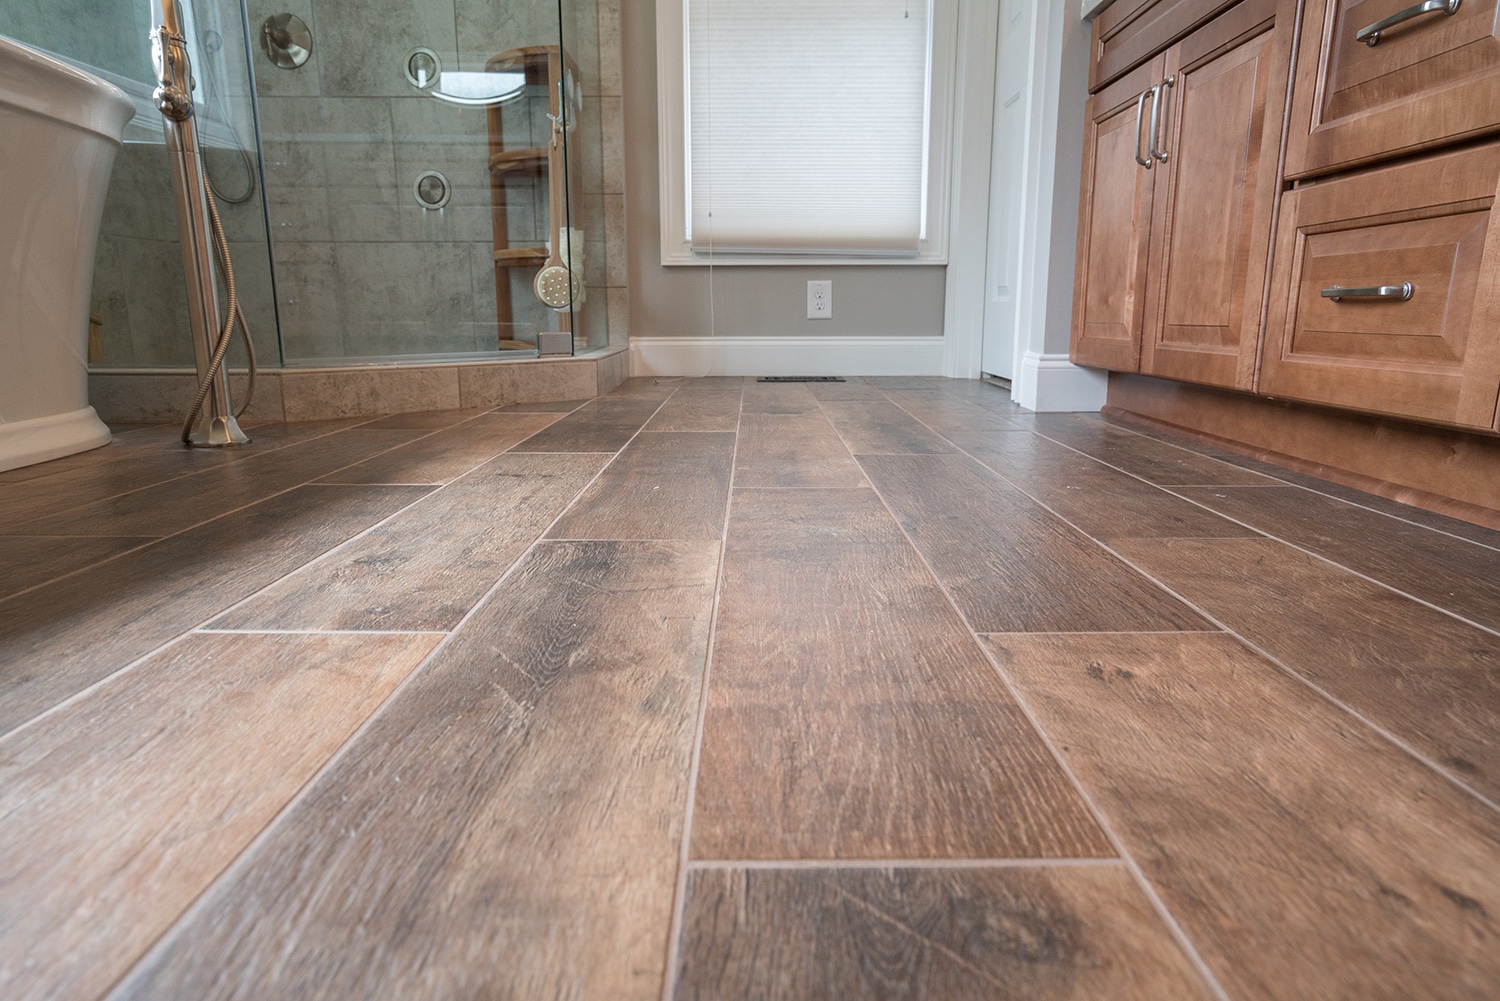 Pros And Cons Of Tile Flooring Tracy, Heated Tile Floor Pros And Cons